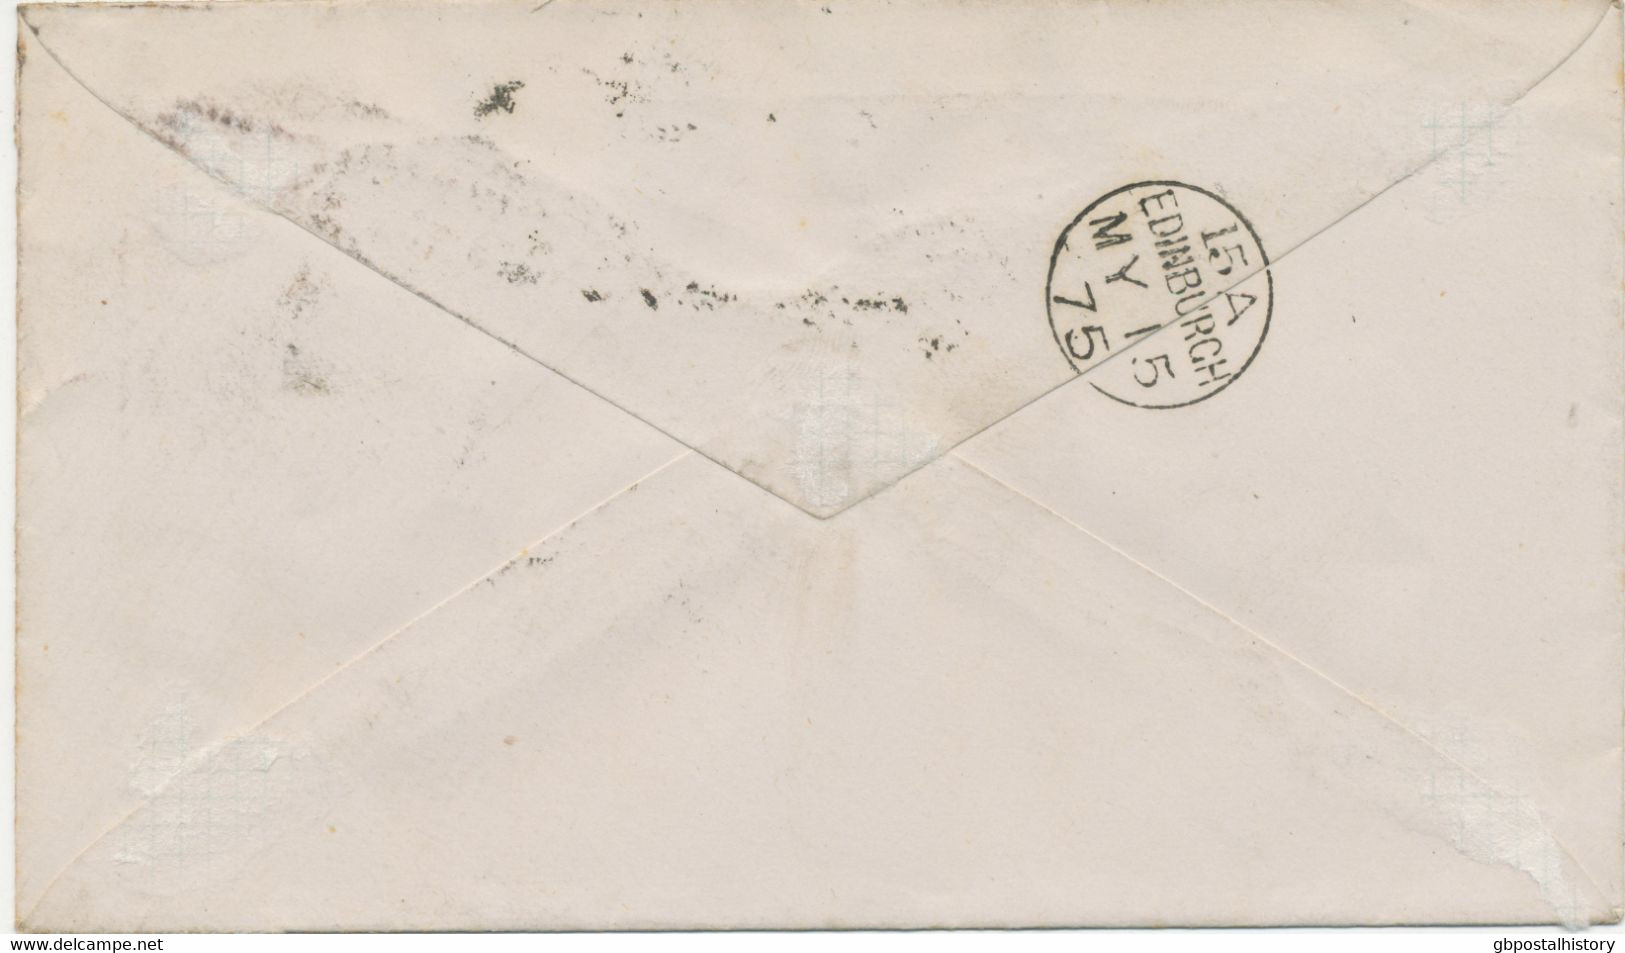 GB „159 / GLASGOW“ Scottish Duplex (4 Bars With Same Length, Time Code „2 &“, Datepart 20mm) On Very Fine Cover - Lettres & Documents